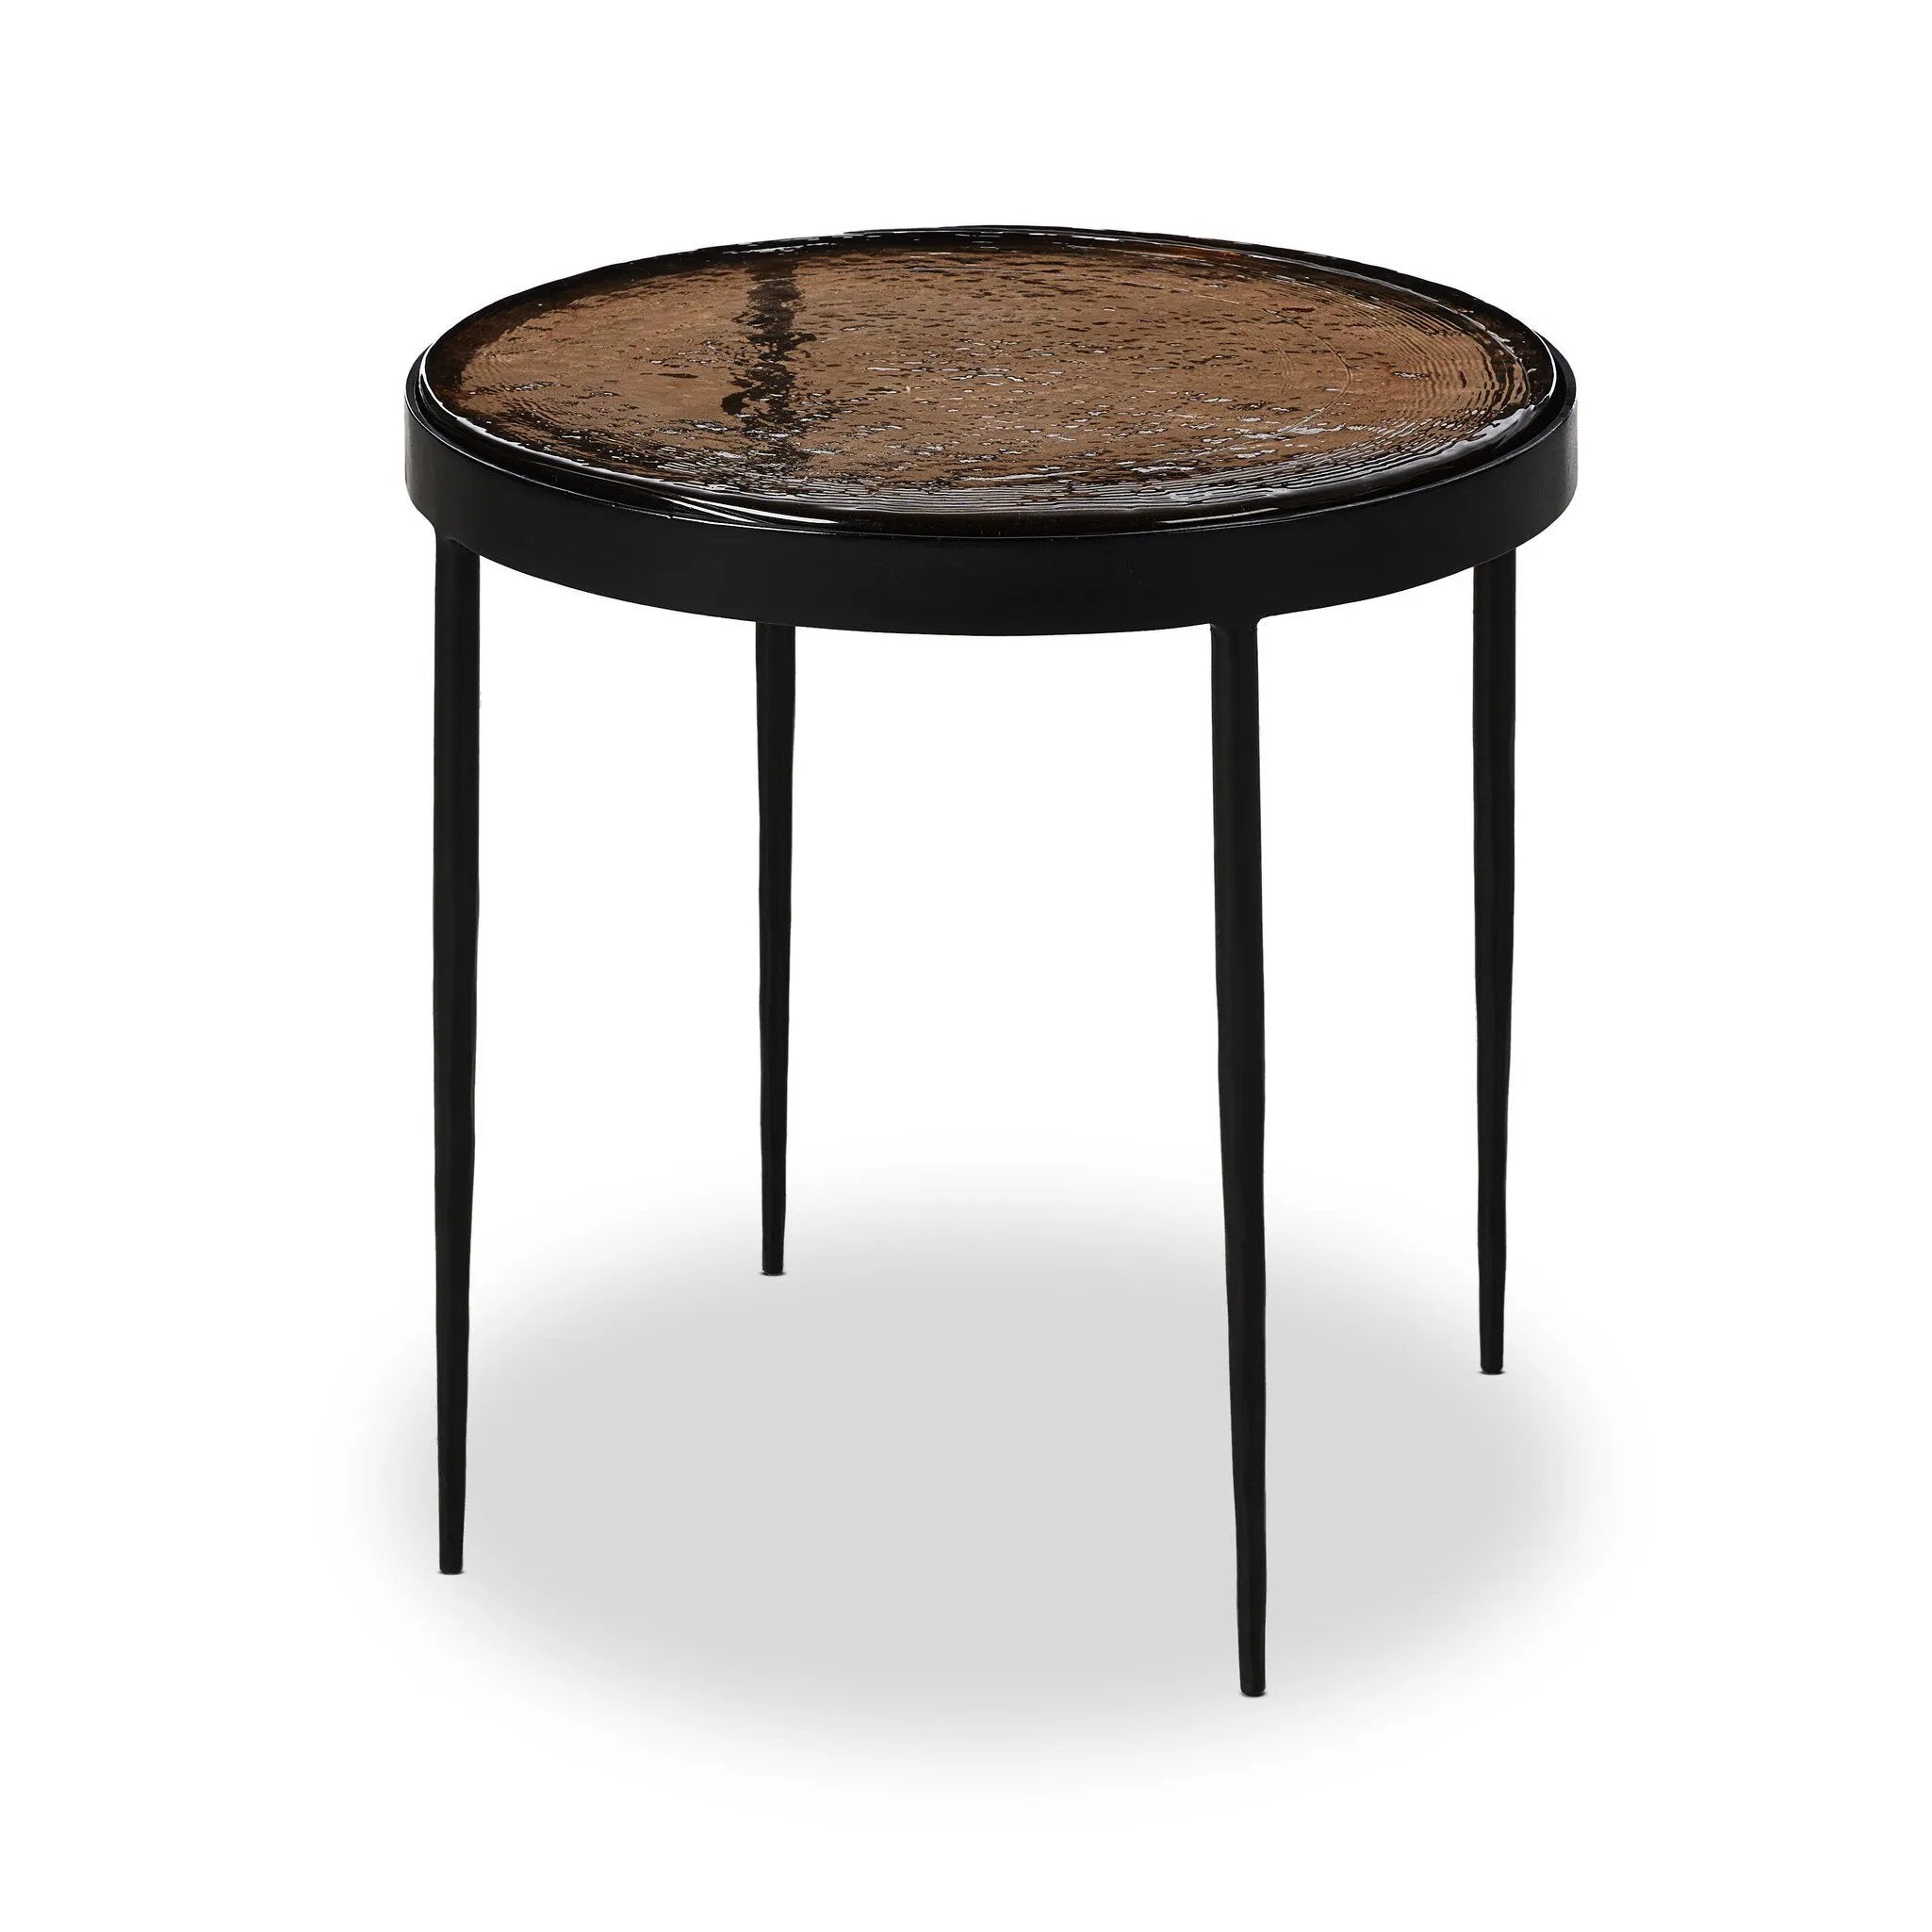 Smoky brown glass-topped table with slim, tapered matte black metal frames for a sleek, modern look. Part of a nesting set, can be used alone or paired with its larger counterpart.Collection: Marlo Amethyst Home provides interior design, new home construction design consulting, vintage area rugs, and lighting in the Alpharetta metro area.